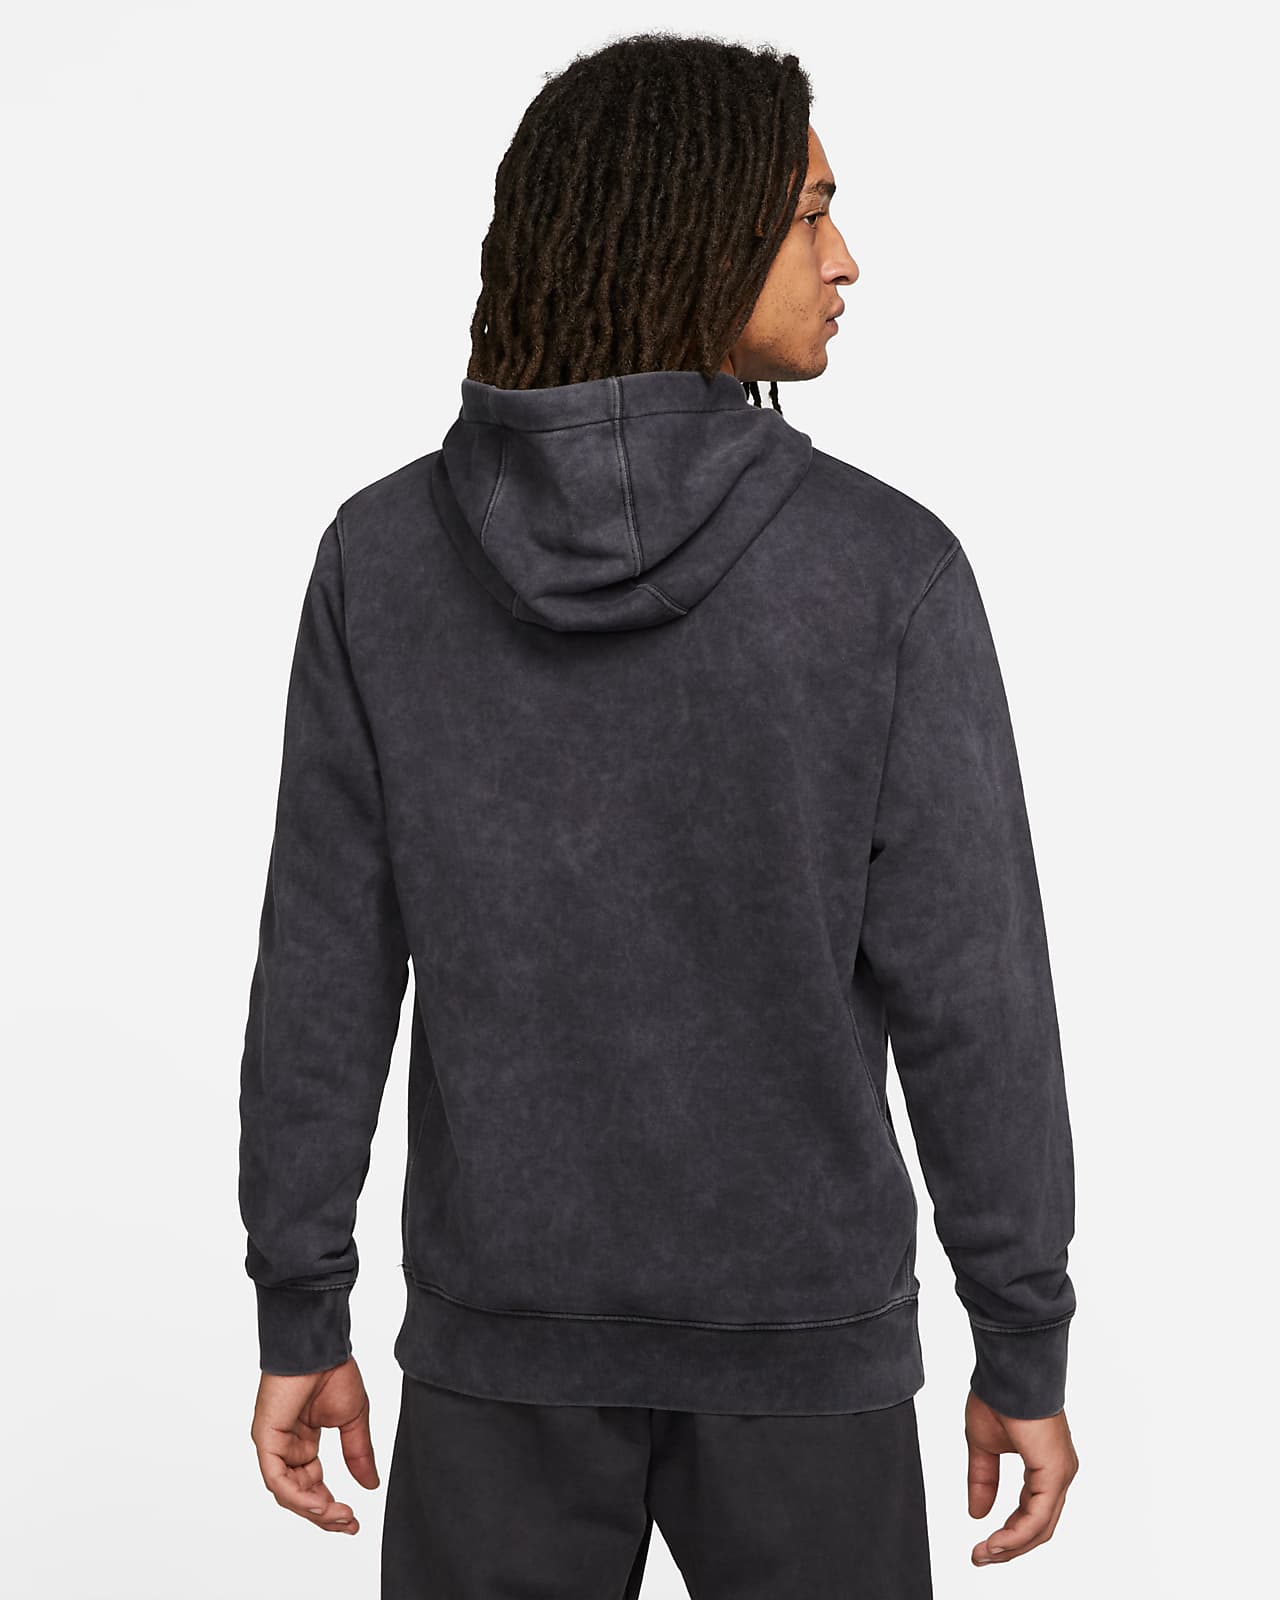 Nike Sportswear Arch Men's French Terry Pullover Hoodie. Nike SA